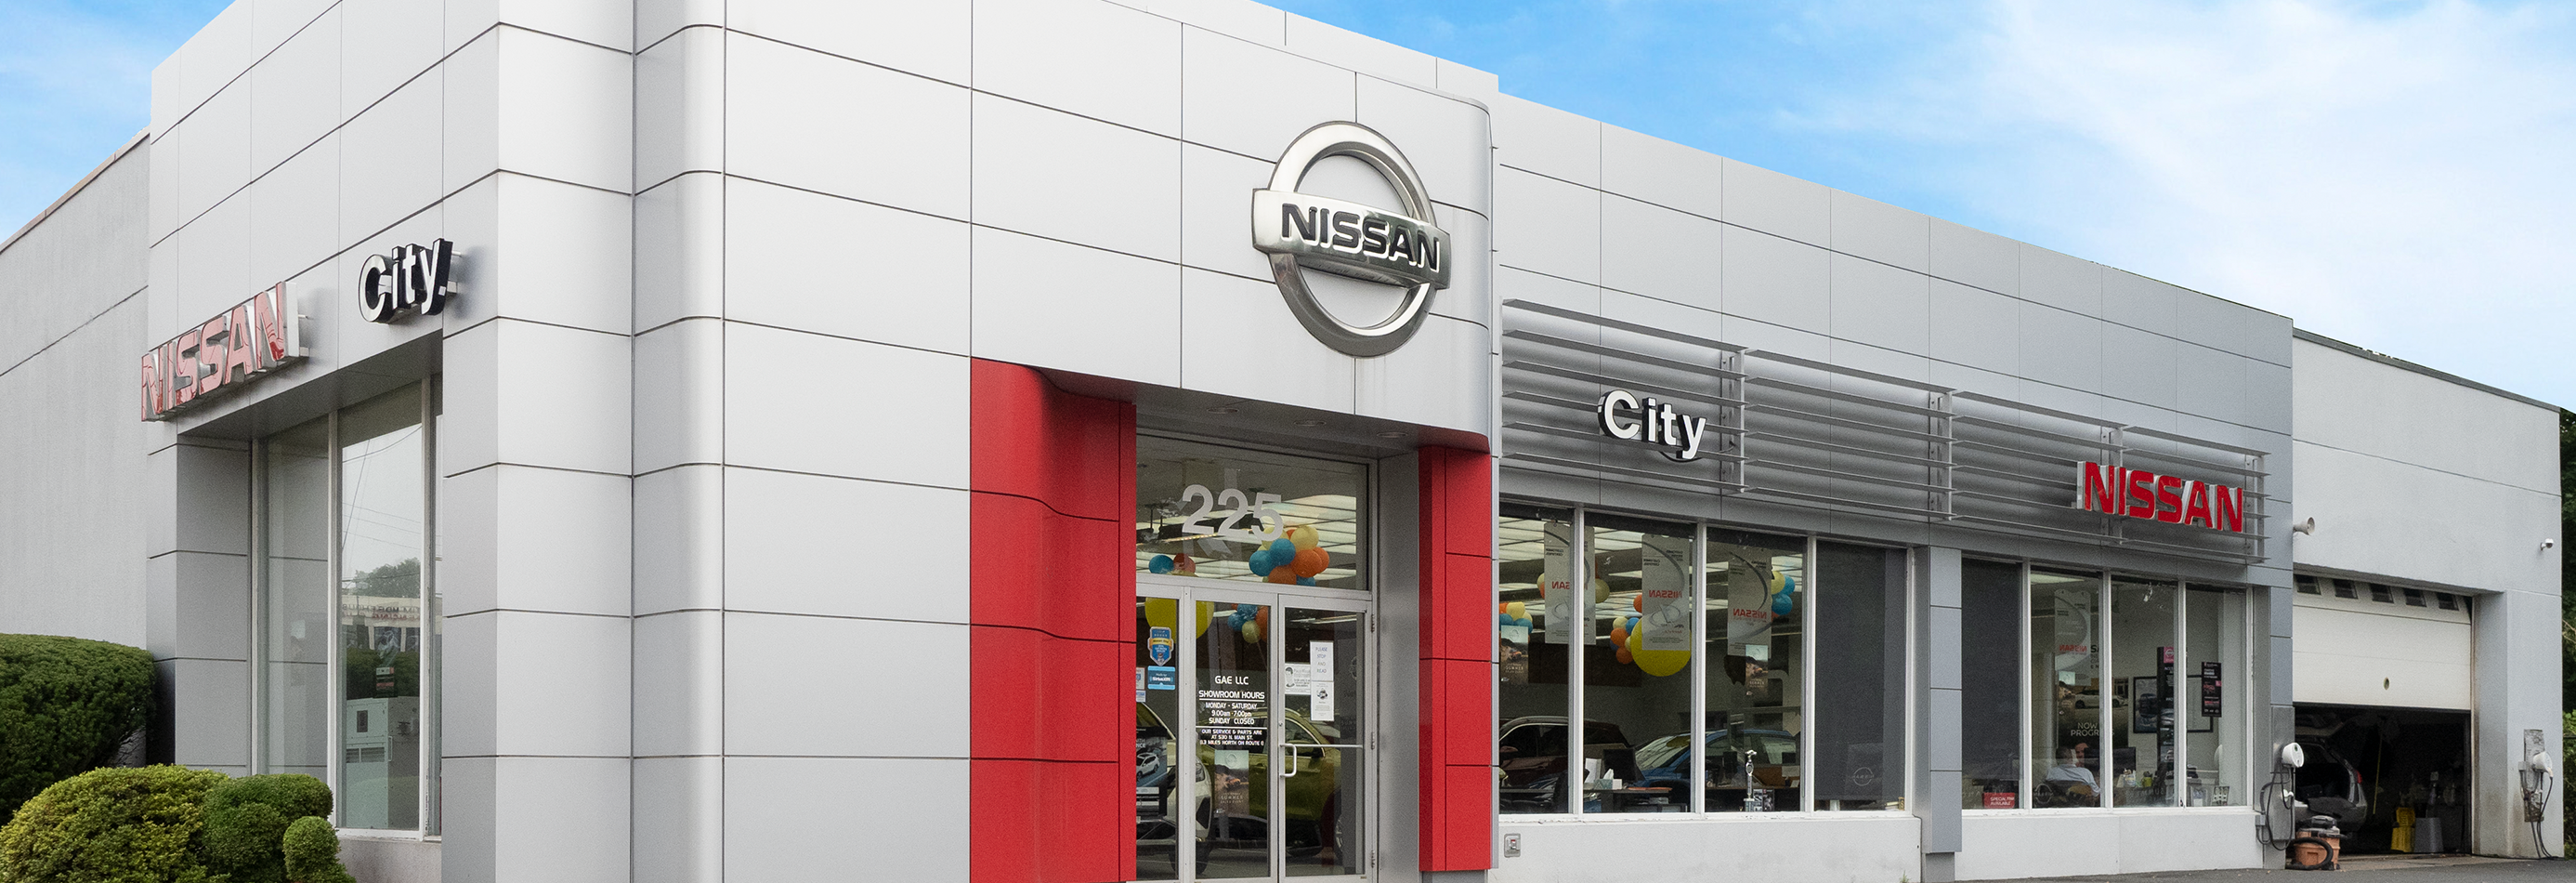 Nissan City serving Yonkers NY